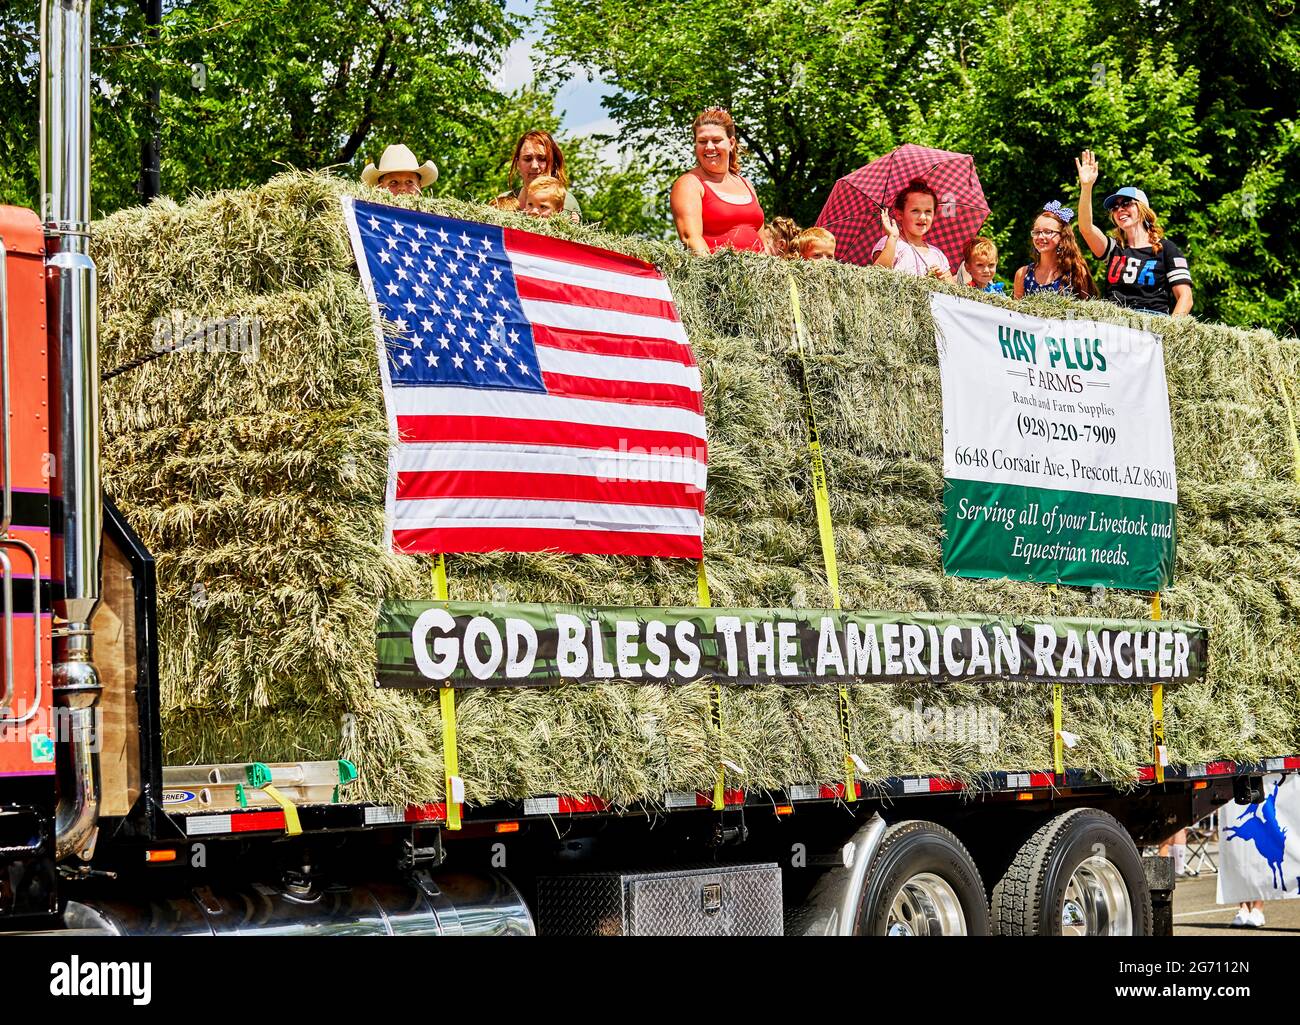 Prescott, Arizona, USA - July 3, 2021: Truck carrying hay bales representing American ranchers in the 4th of July parade Stock Photo